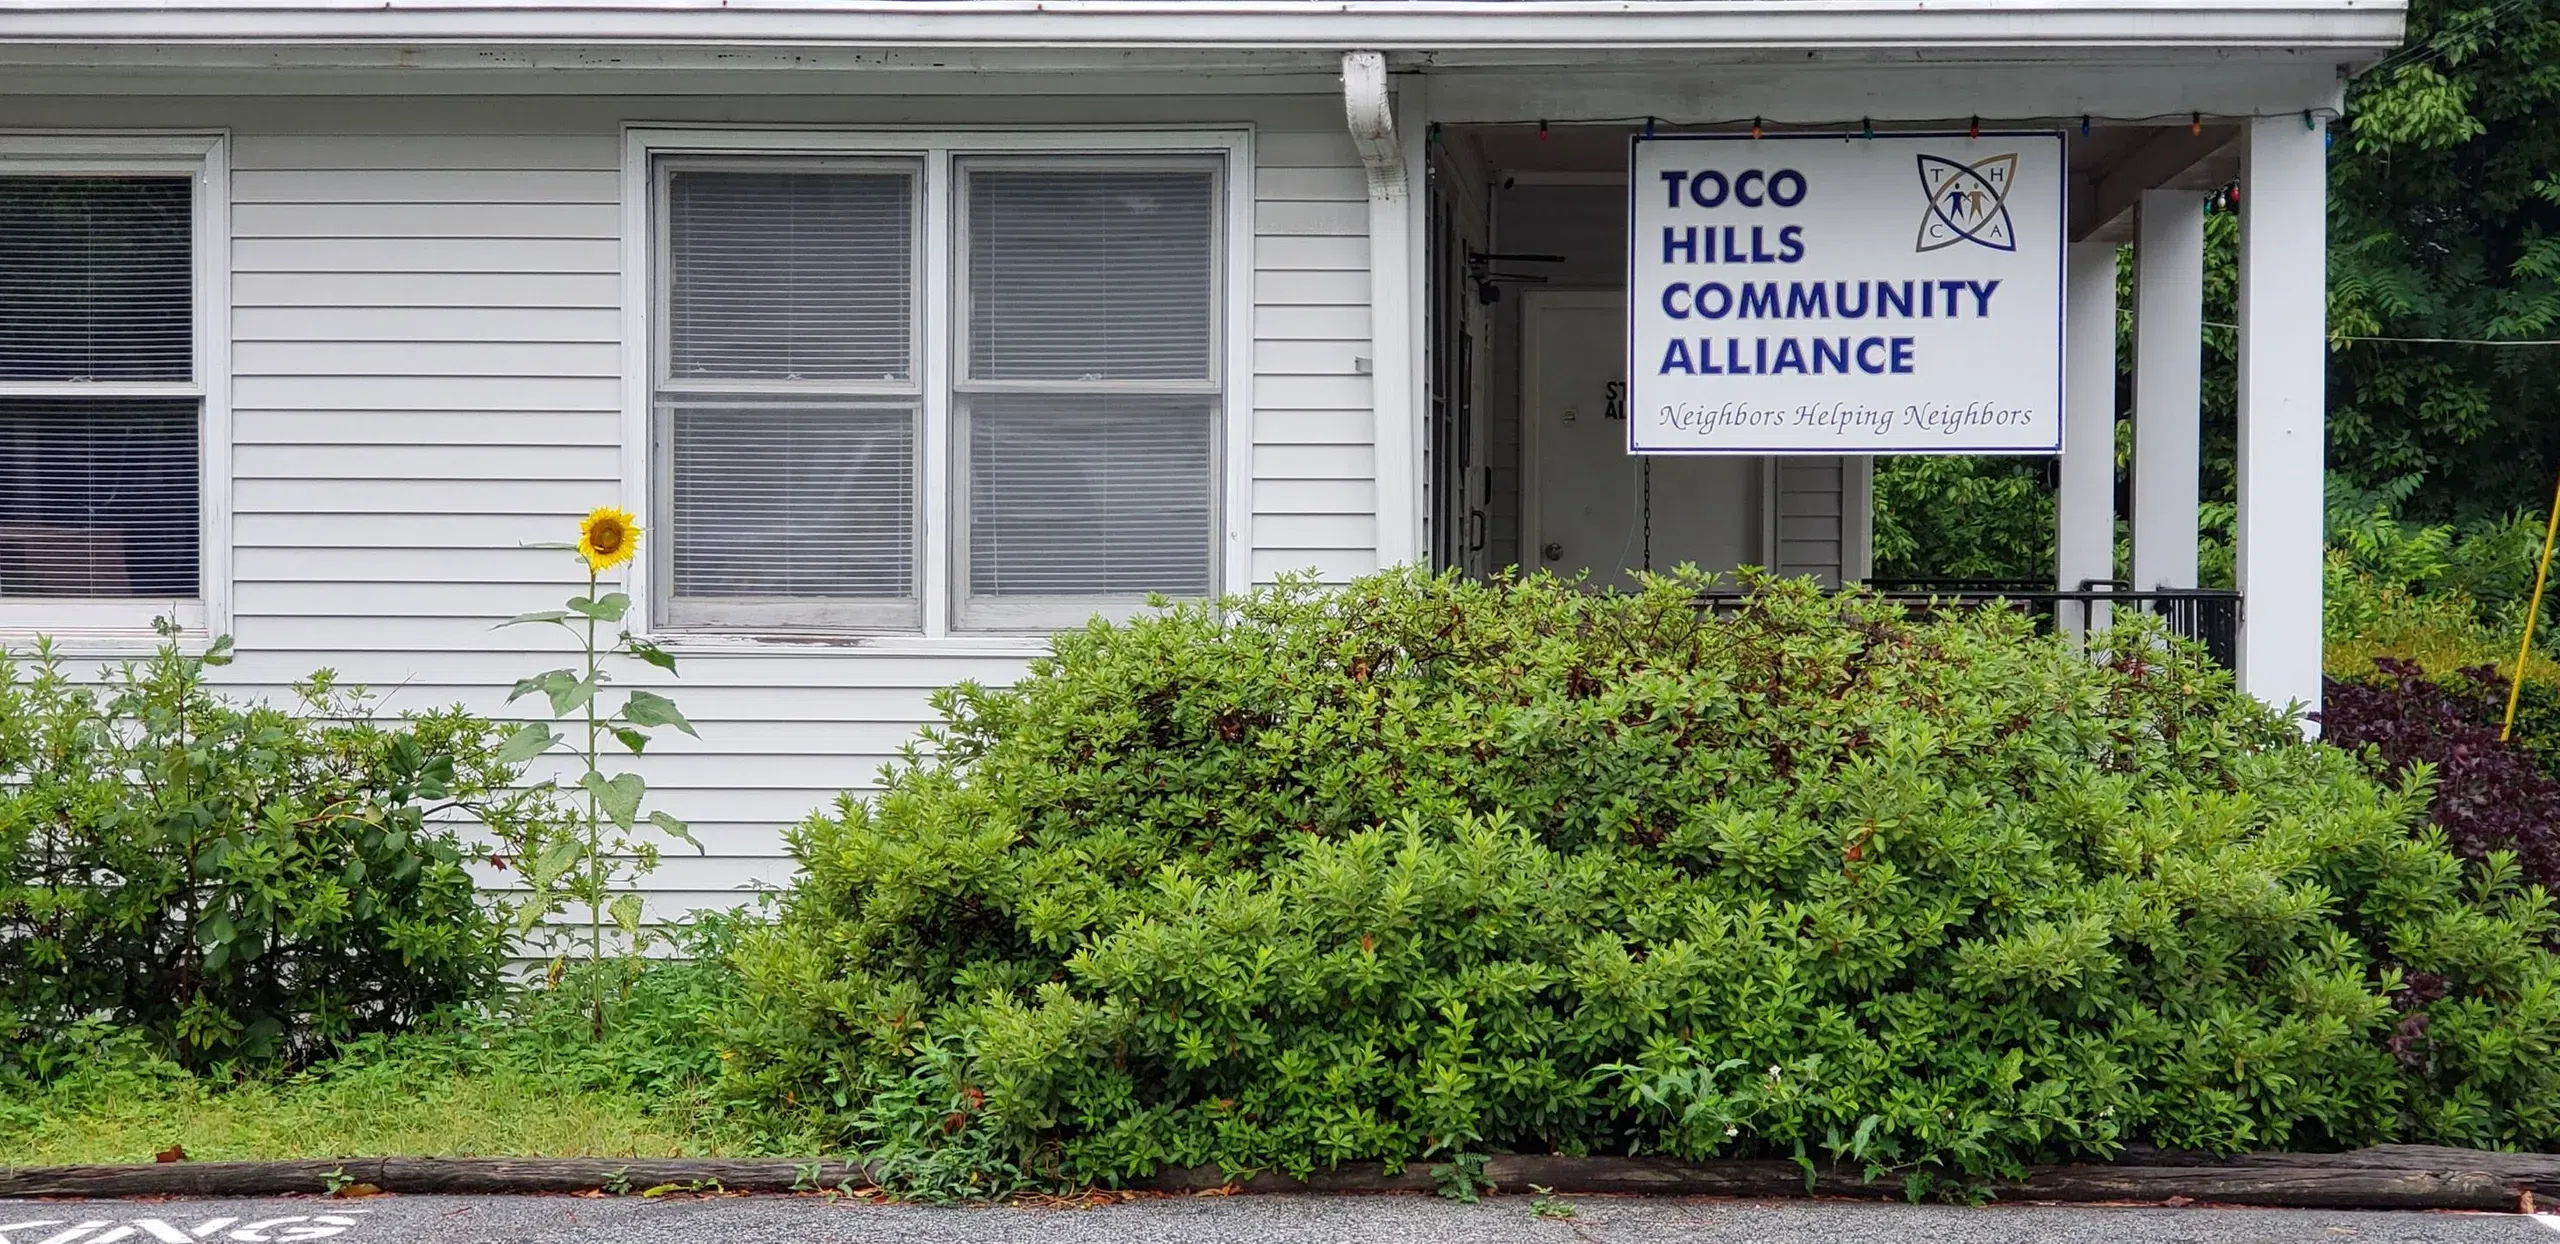 Toco Hills Community Alliance Food Pantry